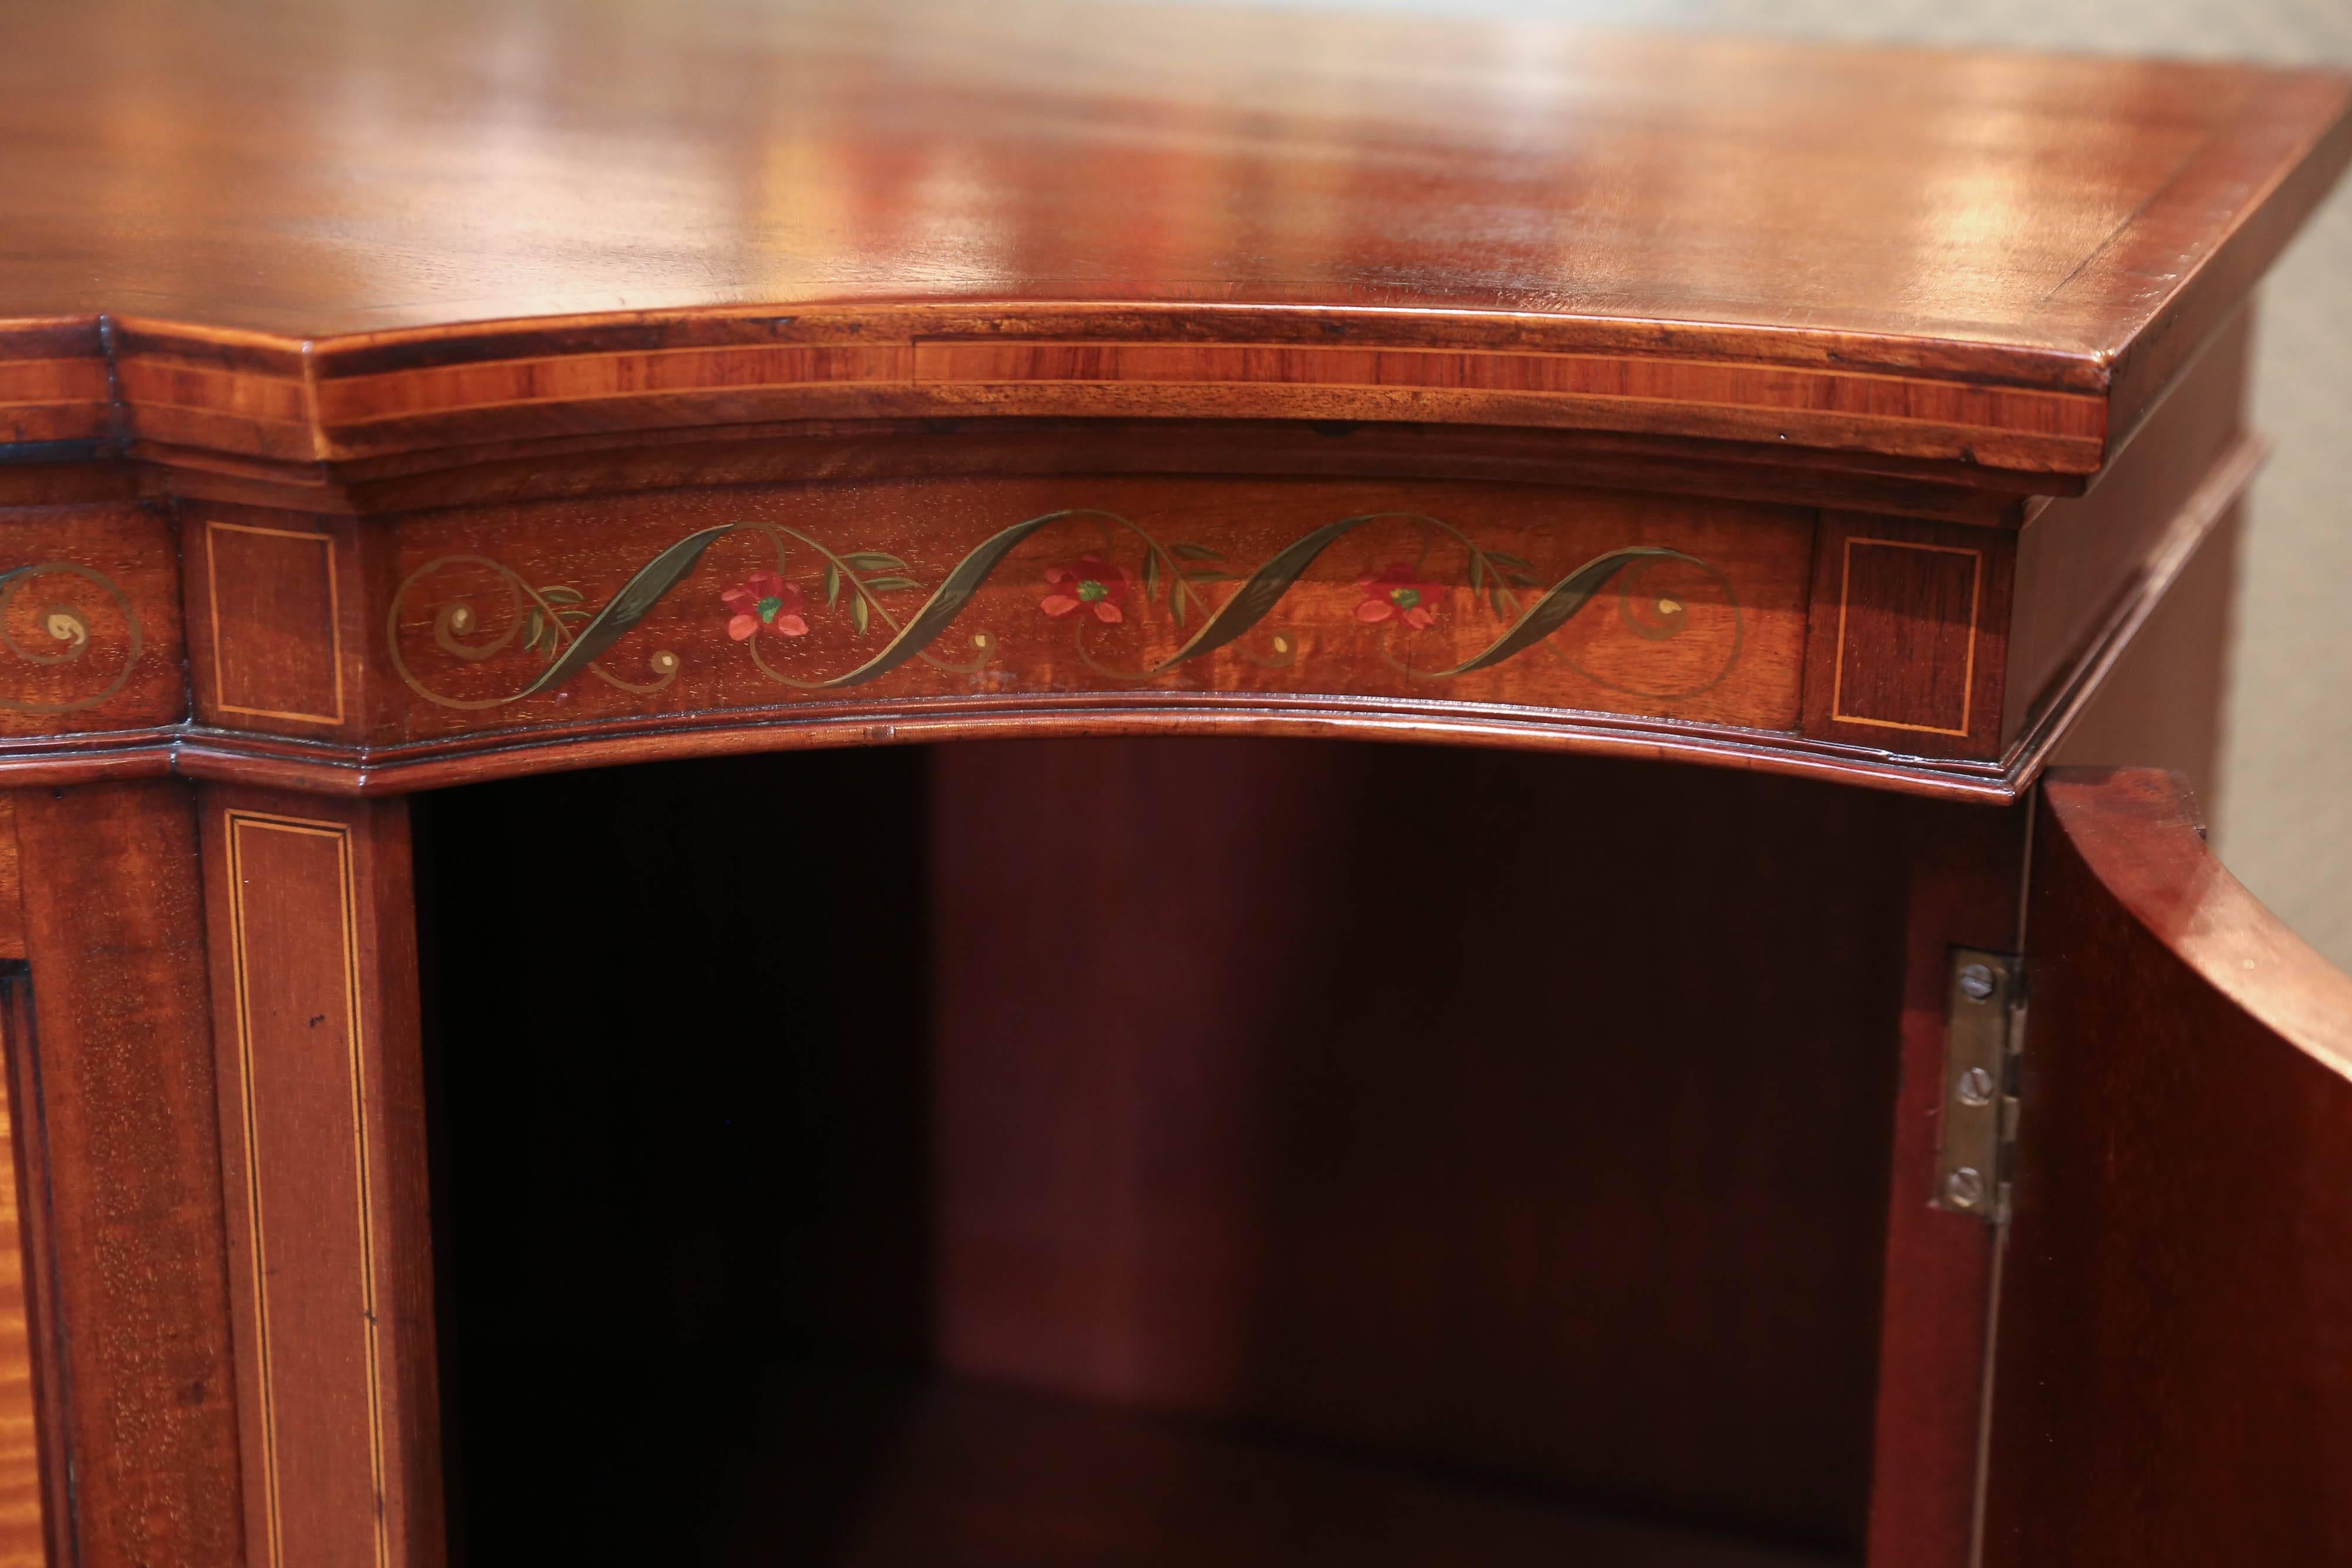 20th Century Adams Style Mahogany Cabinet, Hand-Painted with a Muse and Floral Motif